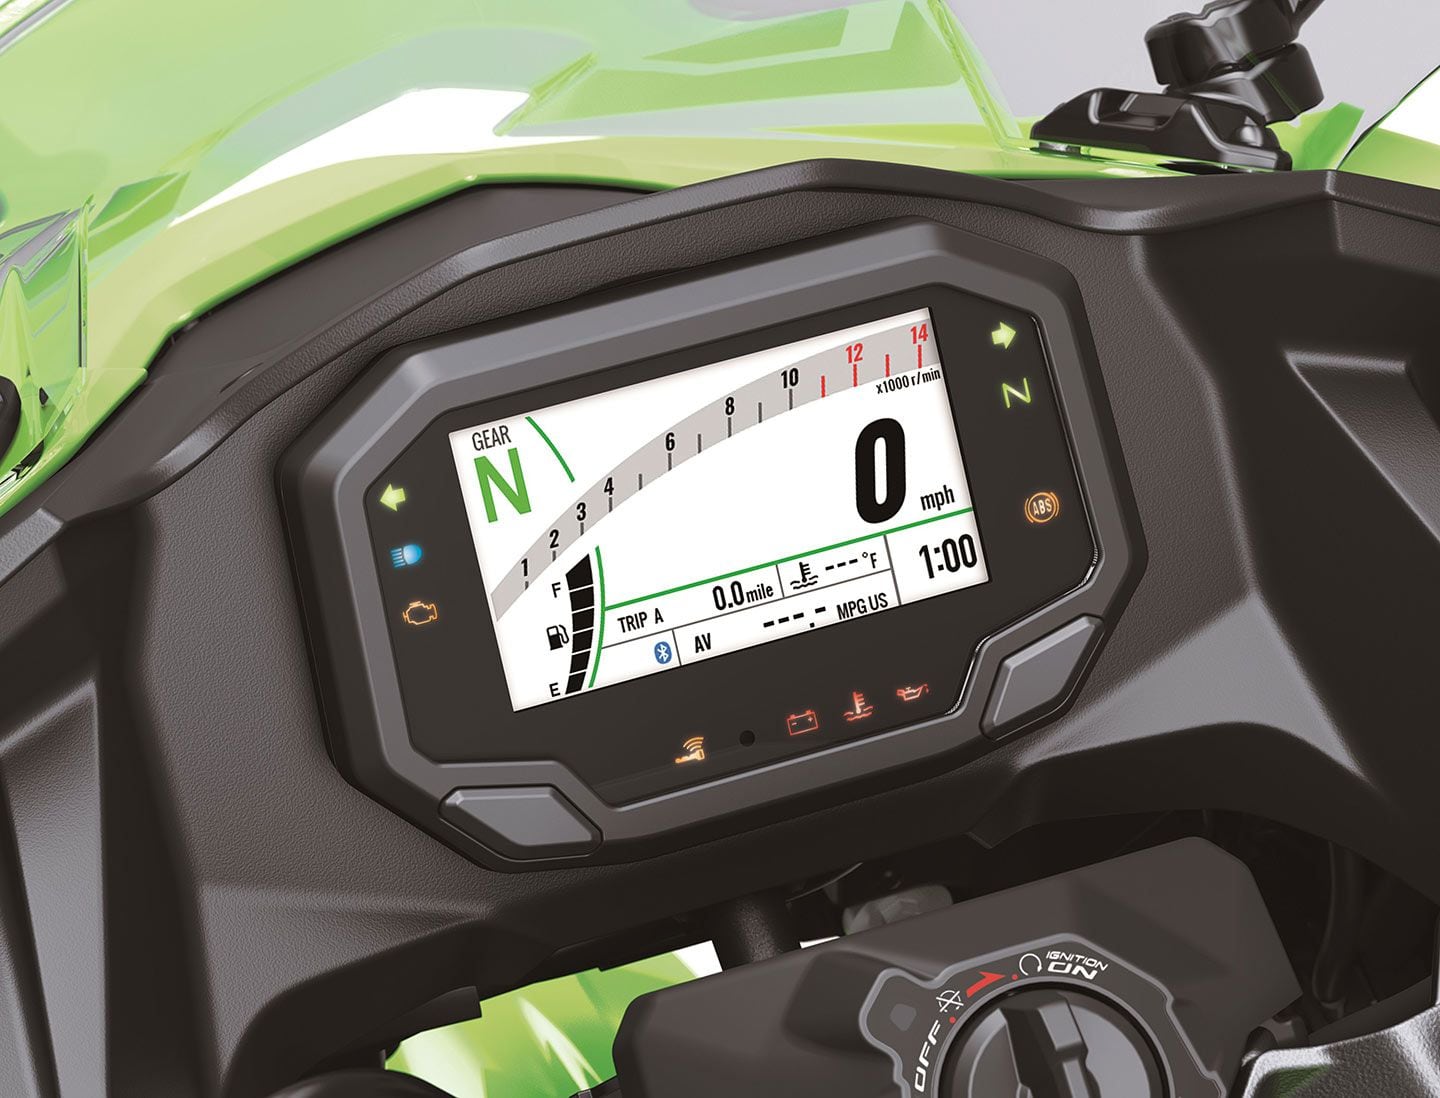 The SE version’s full-color 4.3-inch TFT dash displays all the pertinent data and connects to your smartphone through Kawasaki’s Rideology app.